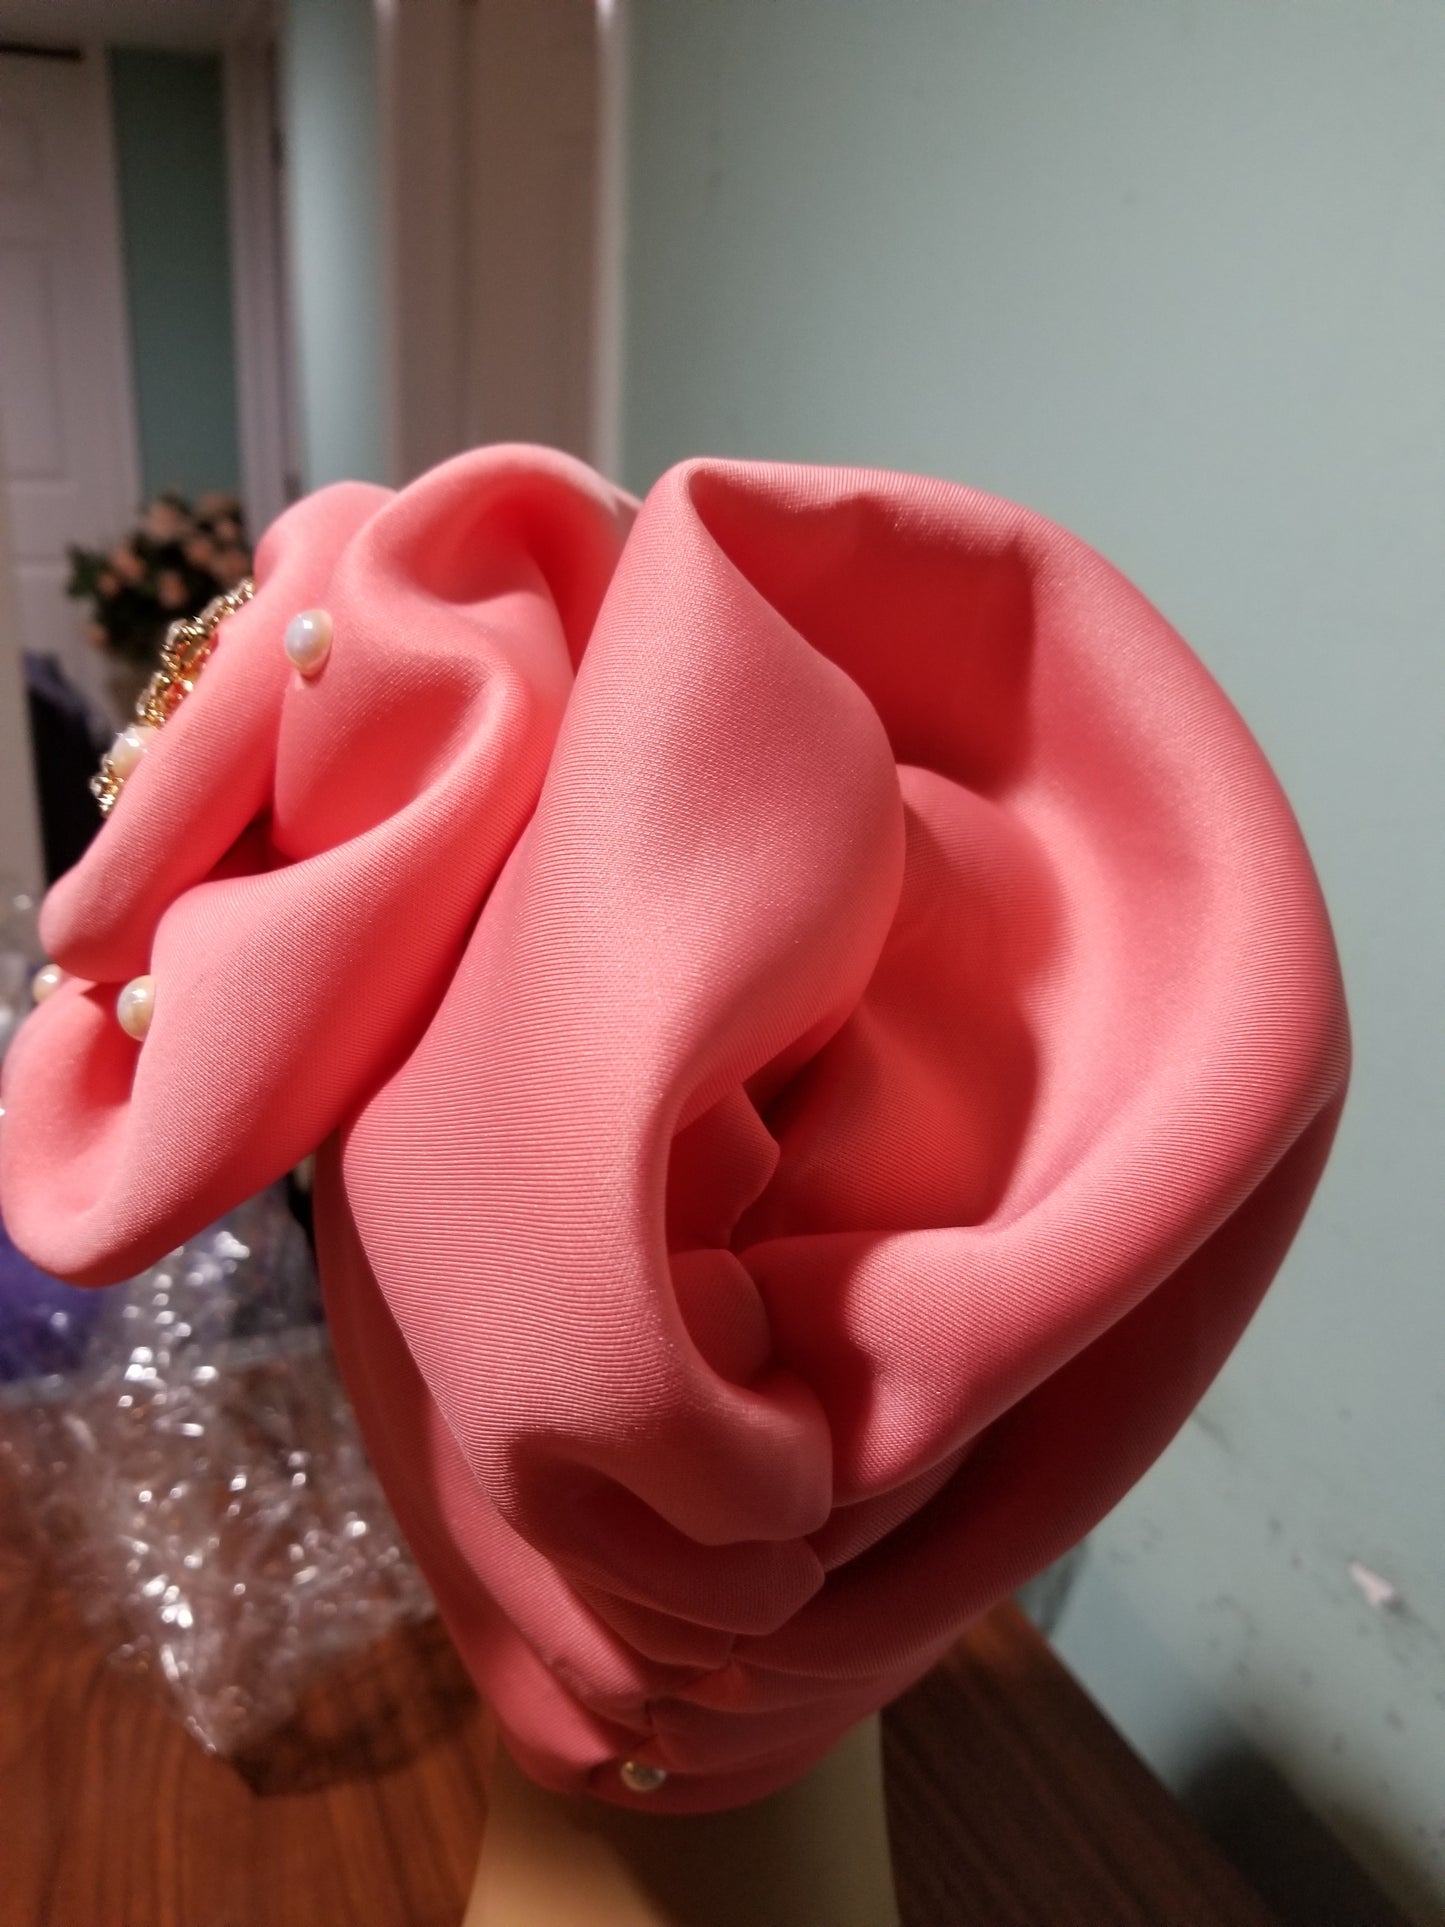 Coral color Women-turban. One size fit all turban. Beautiful flower design with a side brooch to add decor to your head wrap accessories. Head wrap made ready